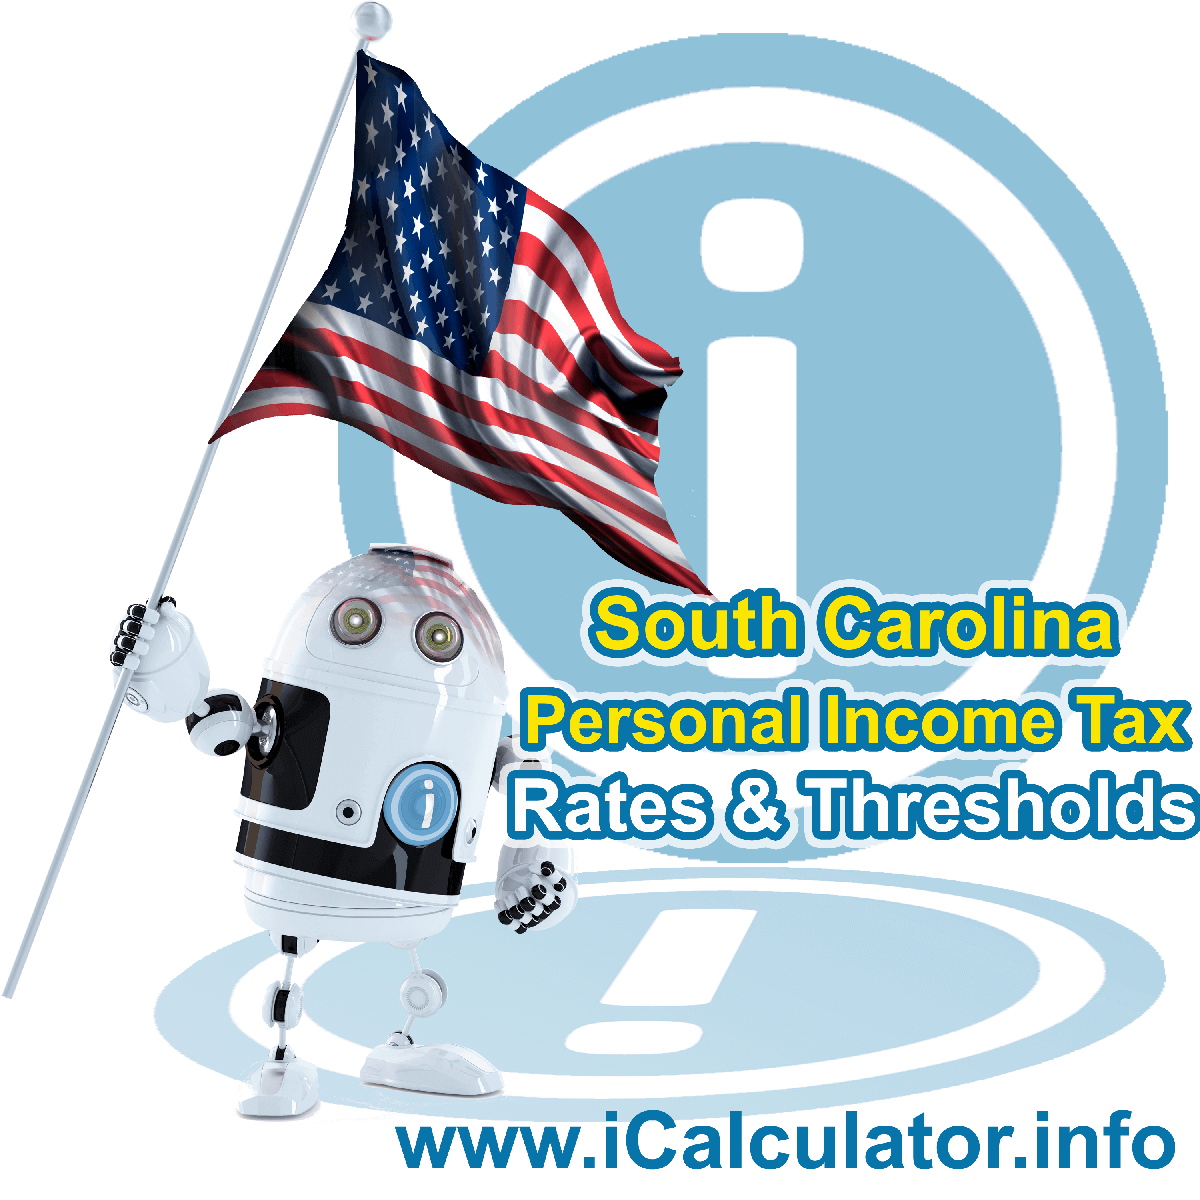 South Carolina State Tax Tables 2017. This image displays details of the South Carolina State Tax Tables for the 2017 tax return year which is provided in support of the 2017 US Tax Calculator